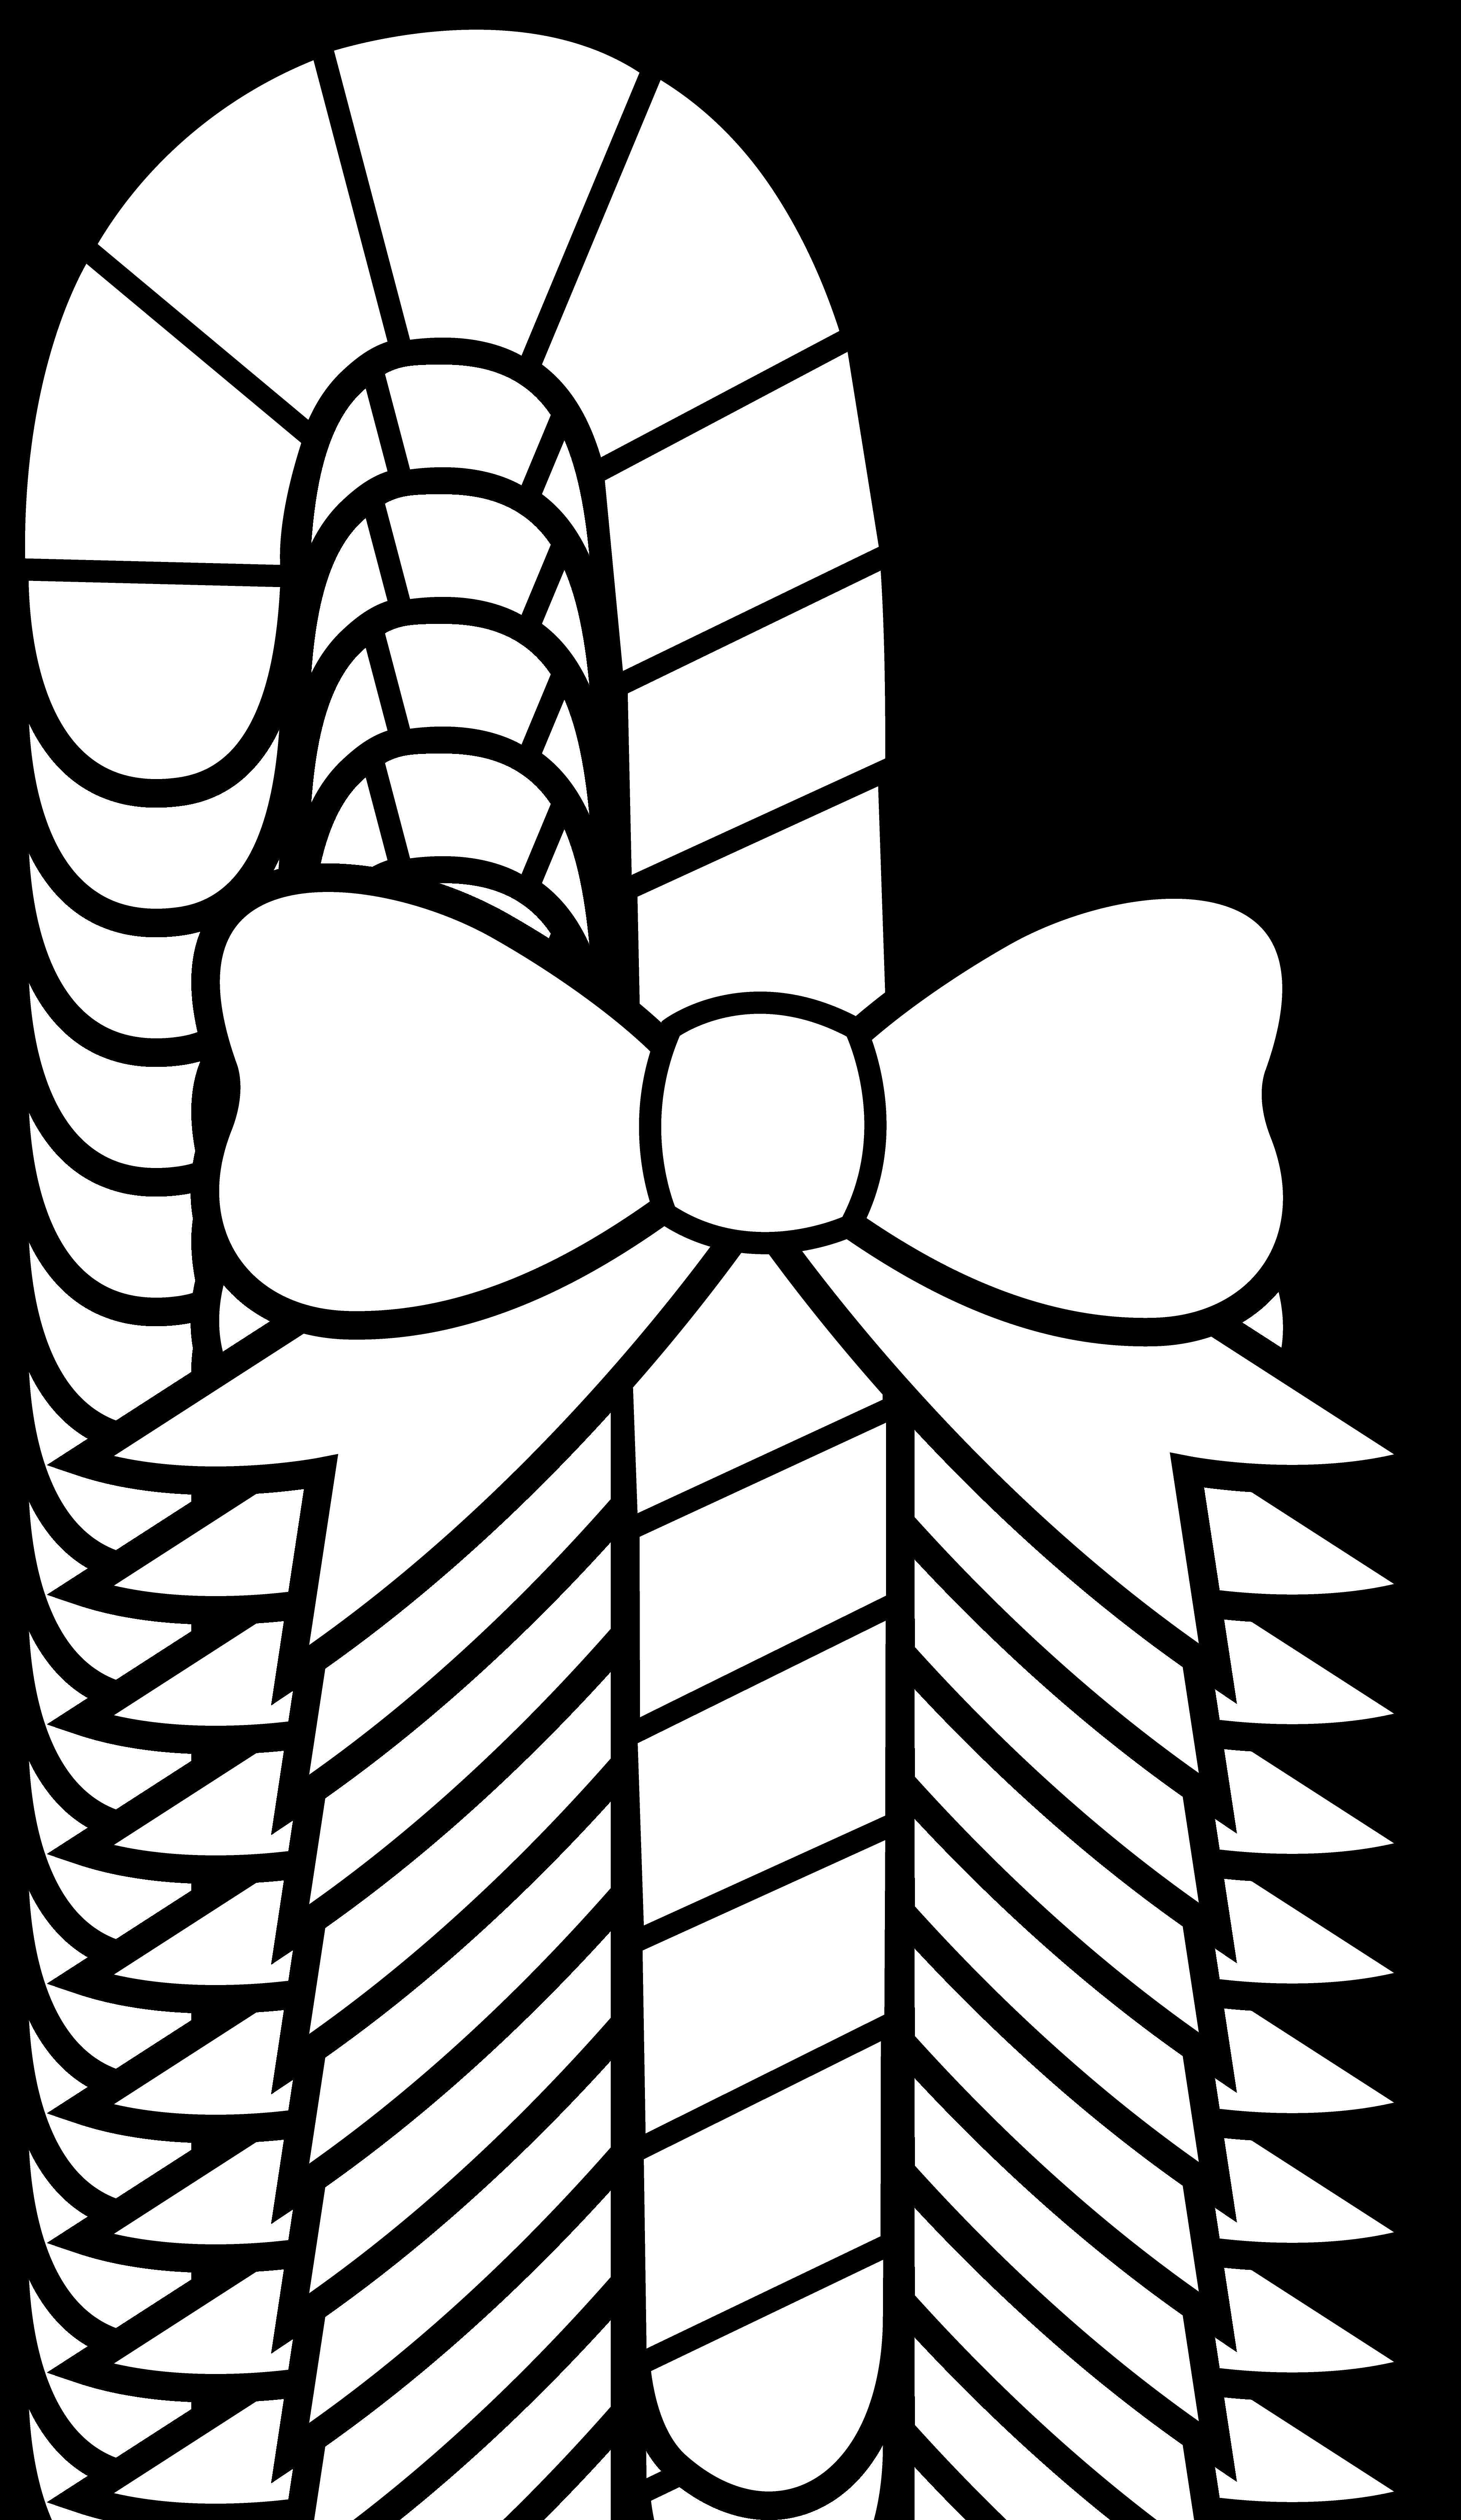 Christmas Candy Cane Coloring Pages
 Christmas Candy Canes Coloring Pages AZ Coloring Pages